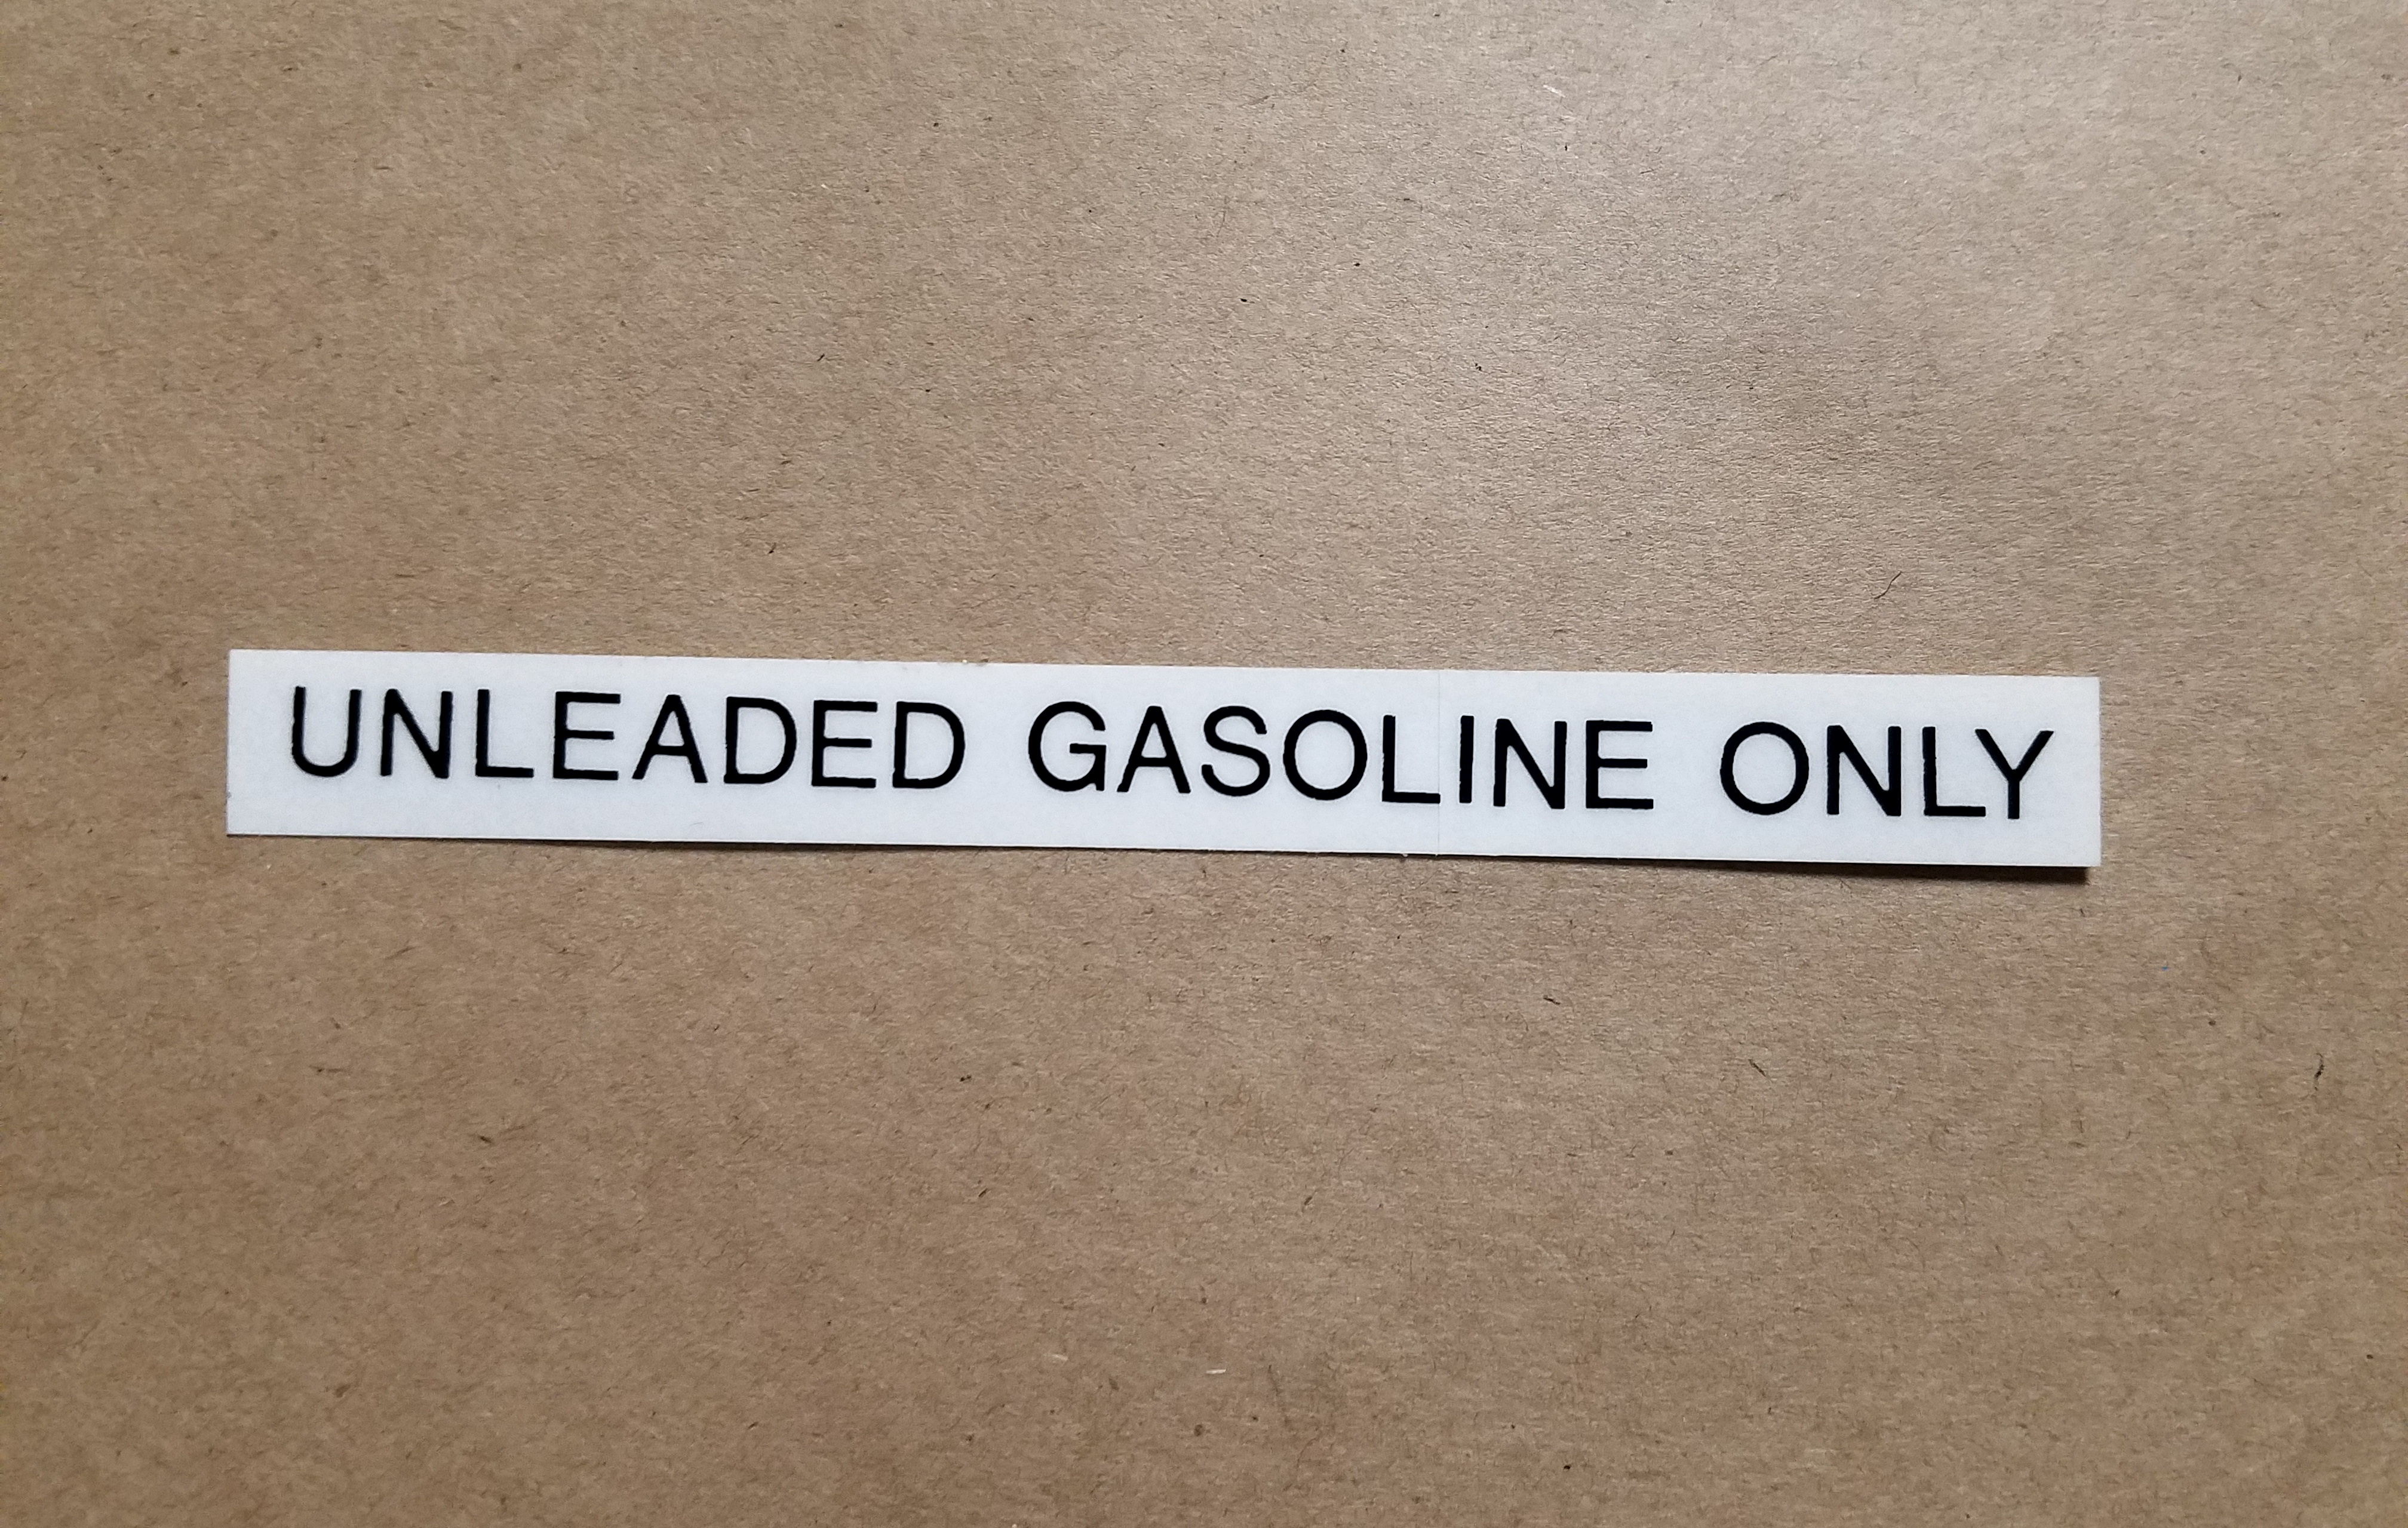 1981 Firebird Unleaded Gasoline Only Decal, 5" long straight black